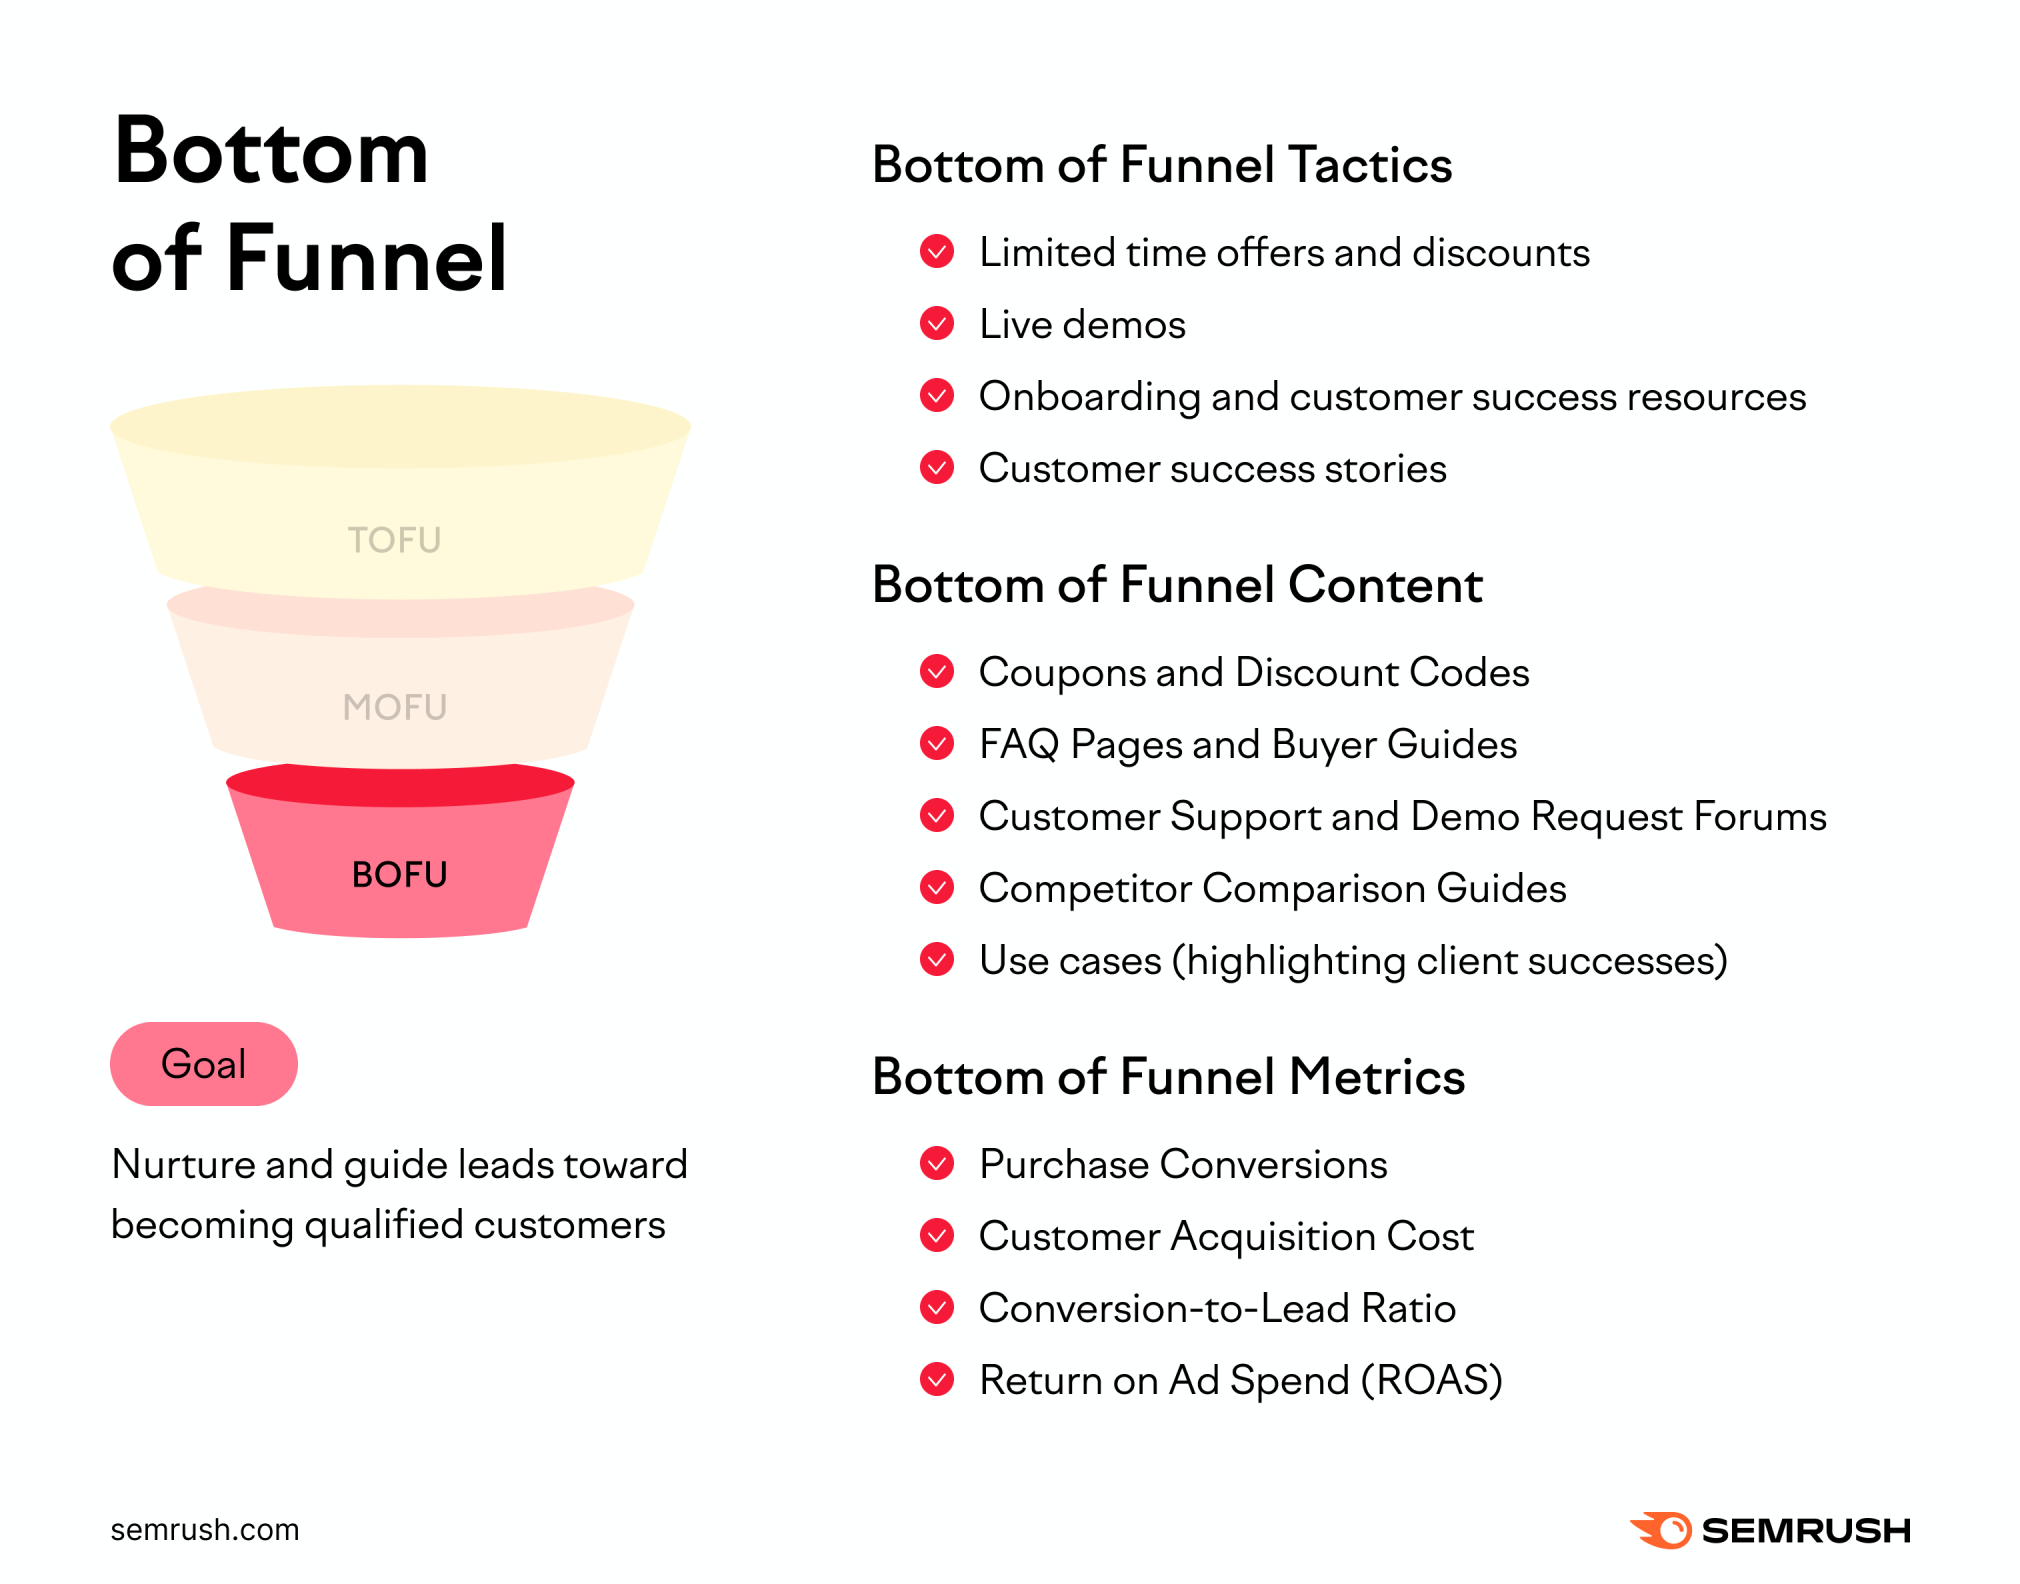 Bottom of Conversion Funnel